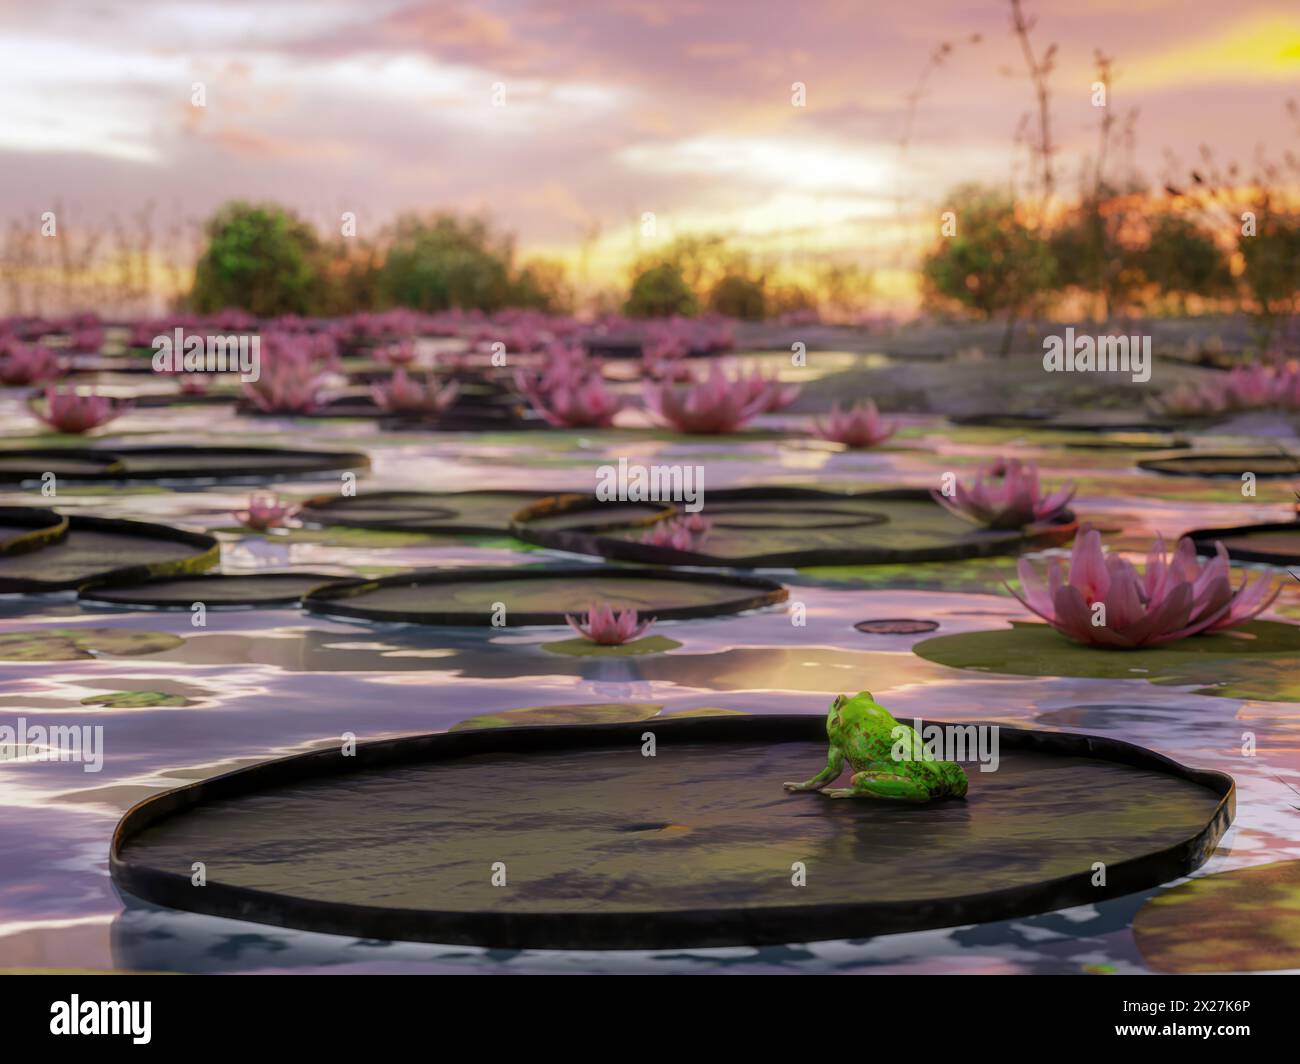 Dramatic fiery sunset reflecting in the pond surface with many waterlily plants and green frog admiring the vista Stock Photo